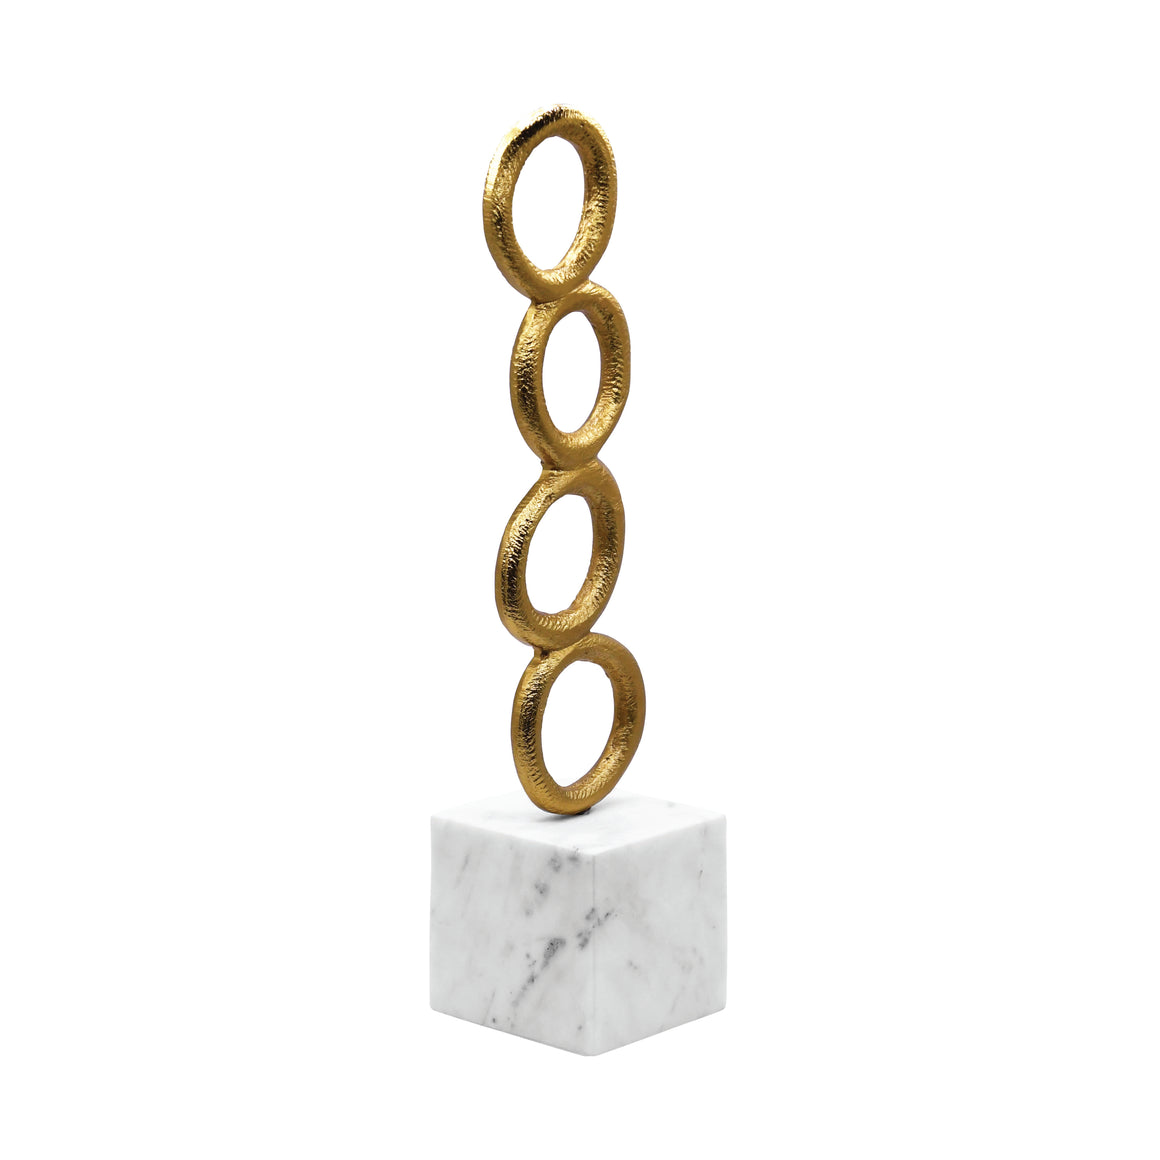 Omar Stacked Circle Shaped Brass Sculpture